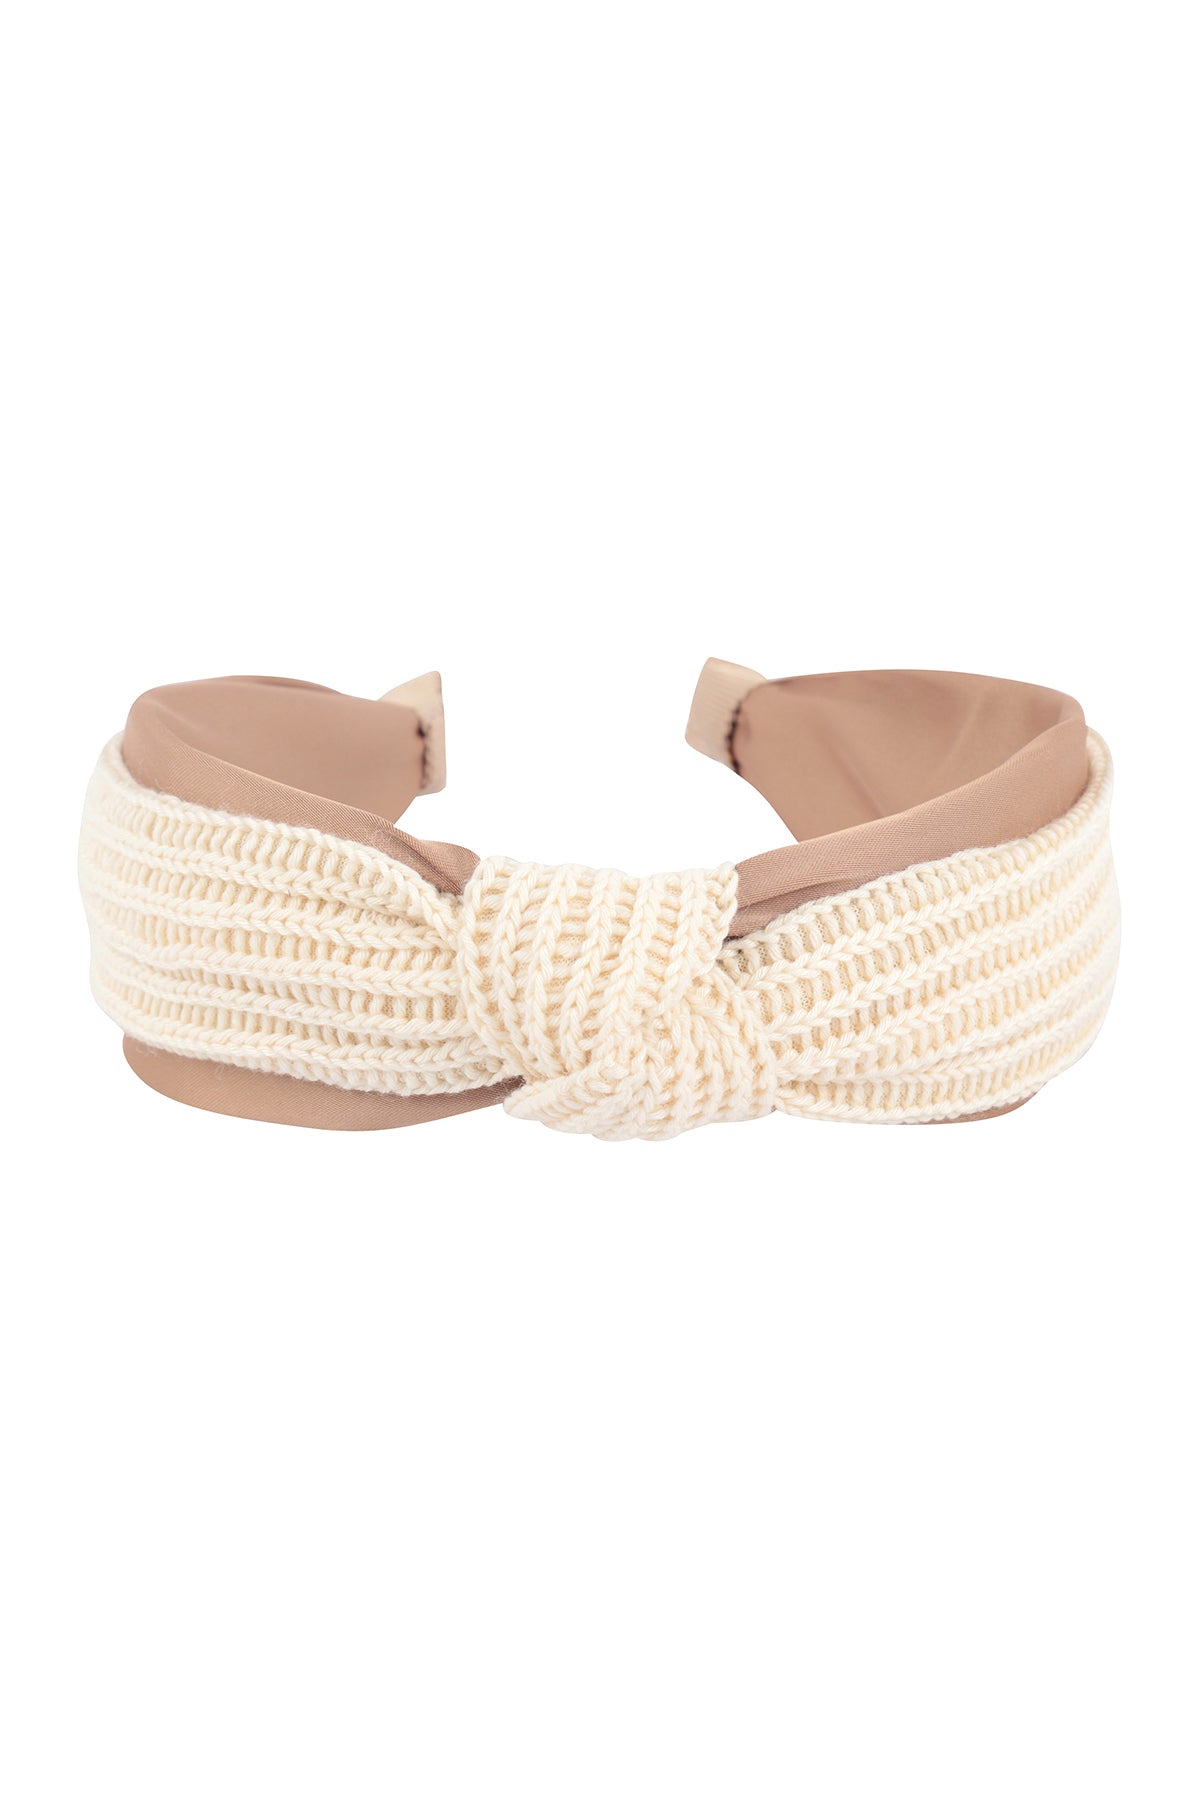 KNITTED KNOT HEADBAND HAIR ACCESORIES